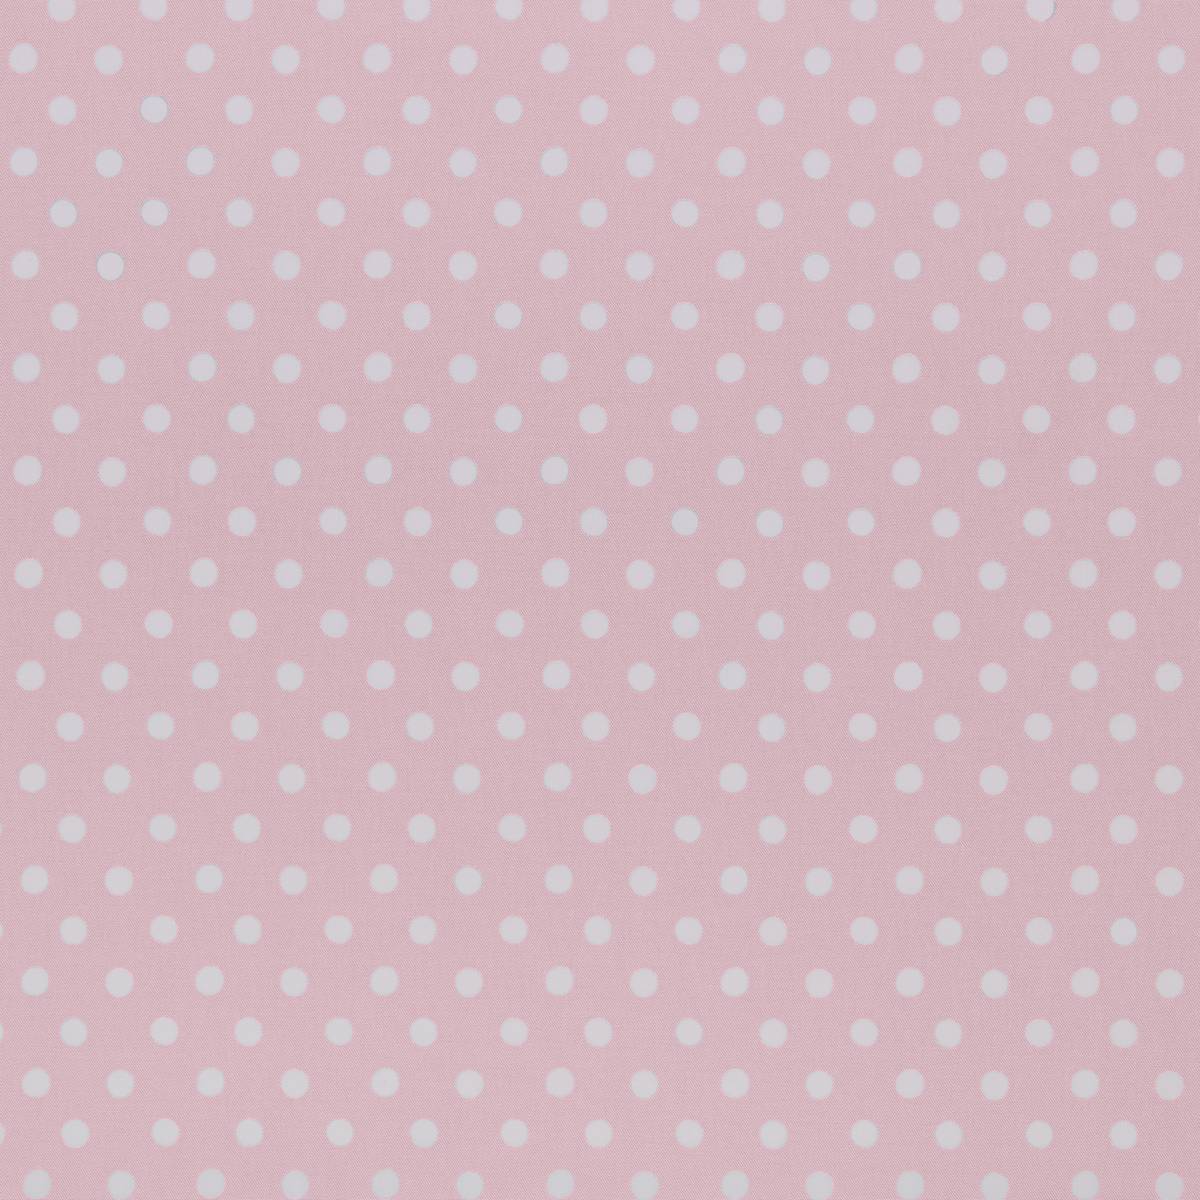 Button Spot Pink Fabric by Cath Kidston